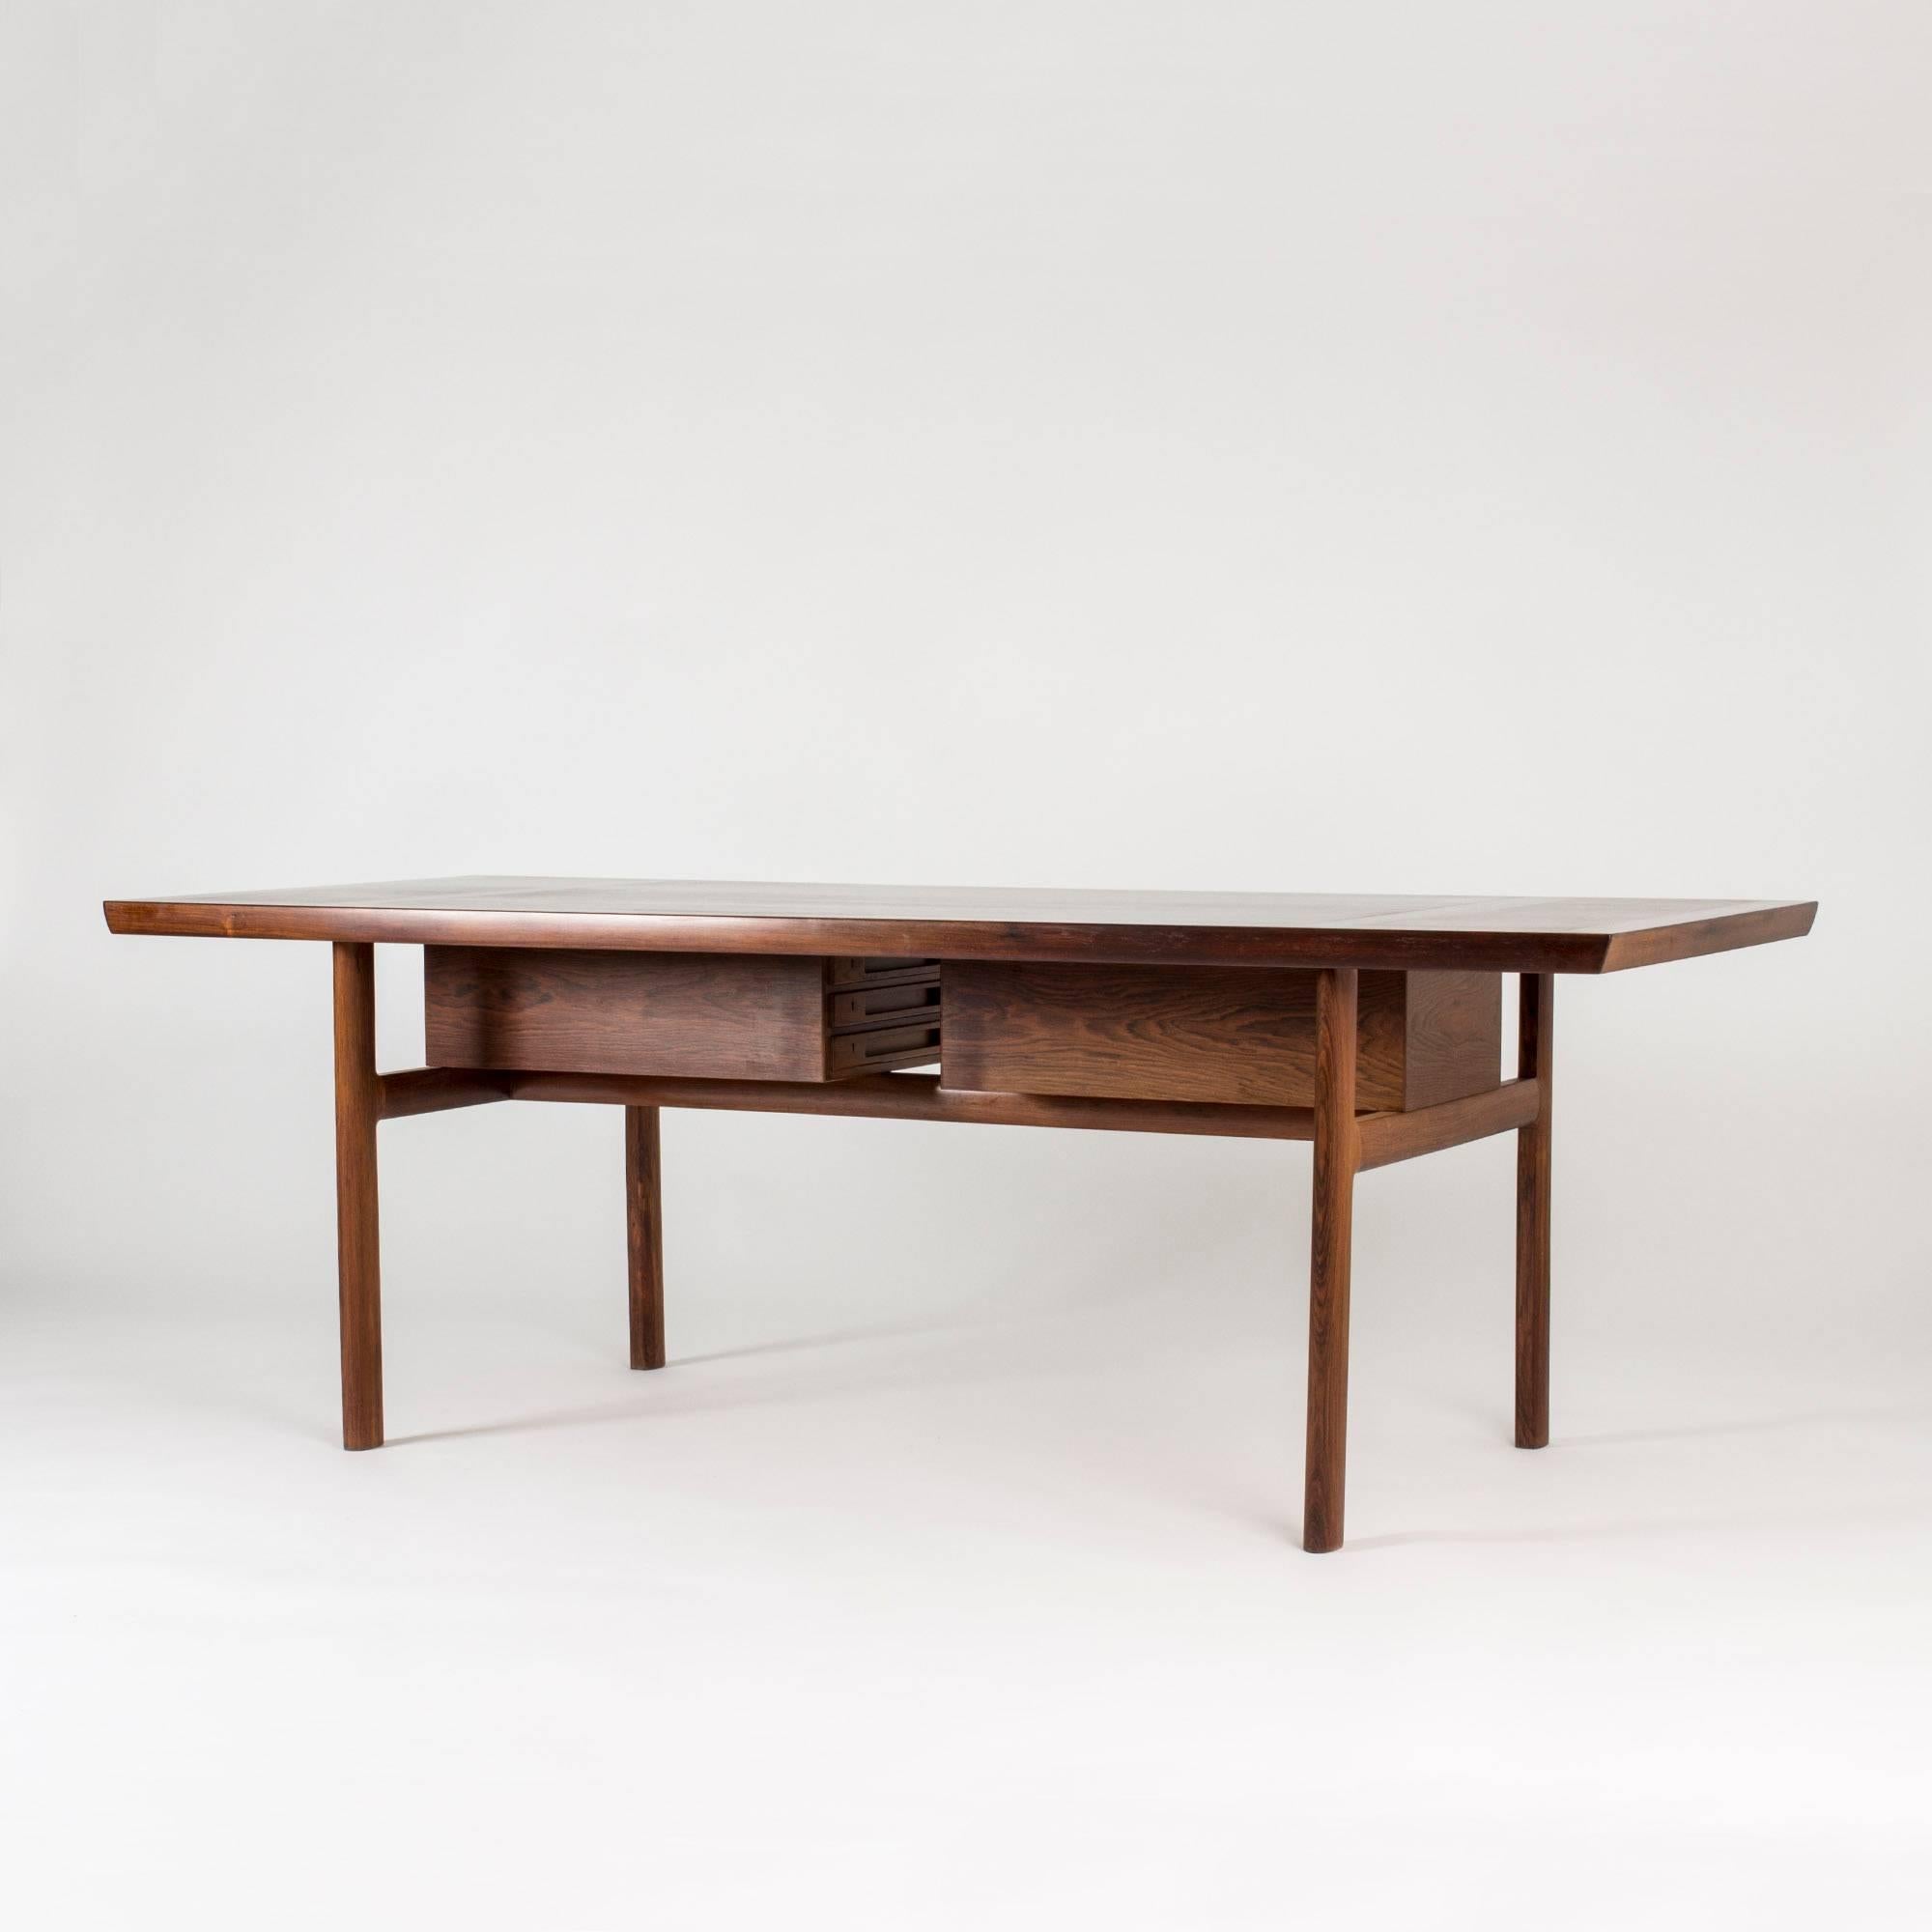 Imposing rosewood desk by Peter Hvidt & Orla Mølgaard. Hefty design with a thick table top and stout legs, contrasted with carefully carved drawer fronts. The drawers can be turned 90 degrees to face each other under the table, which gives extra leg